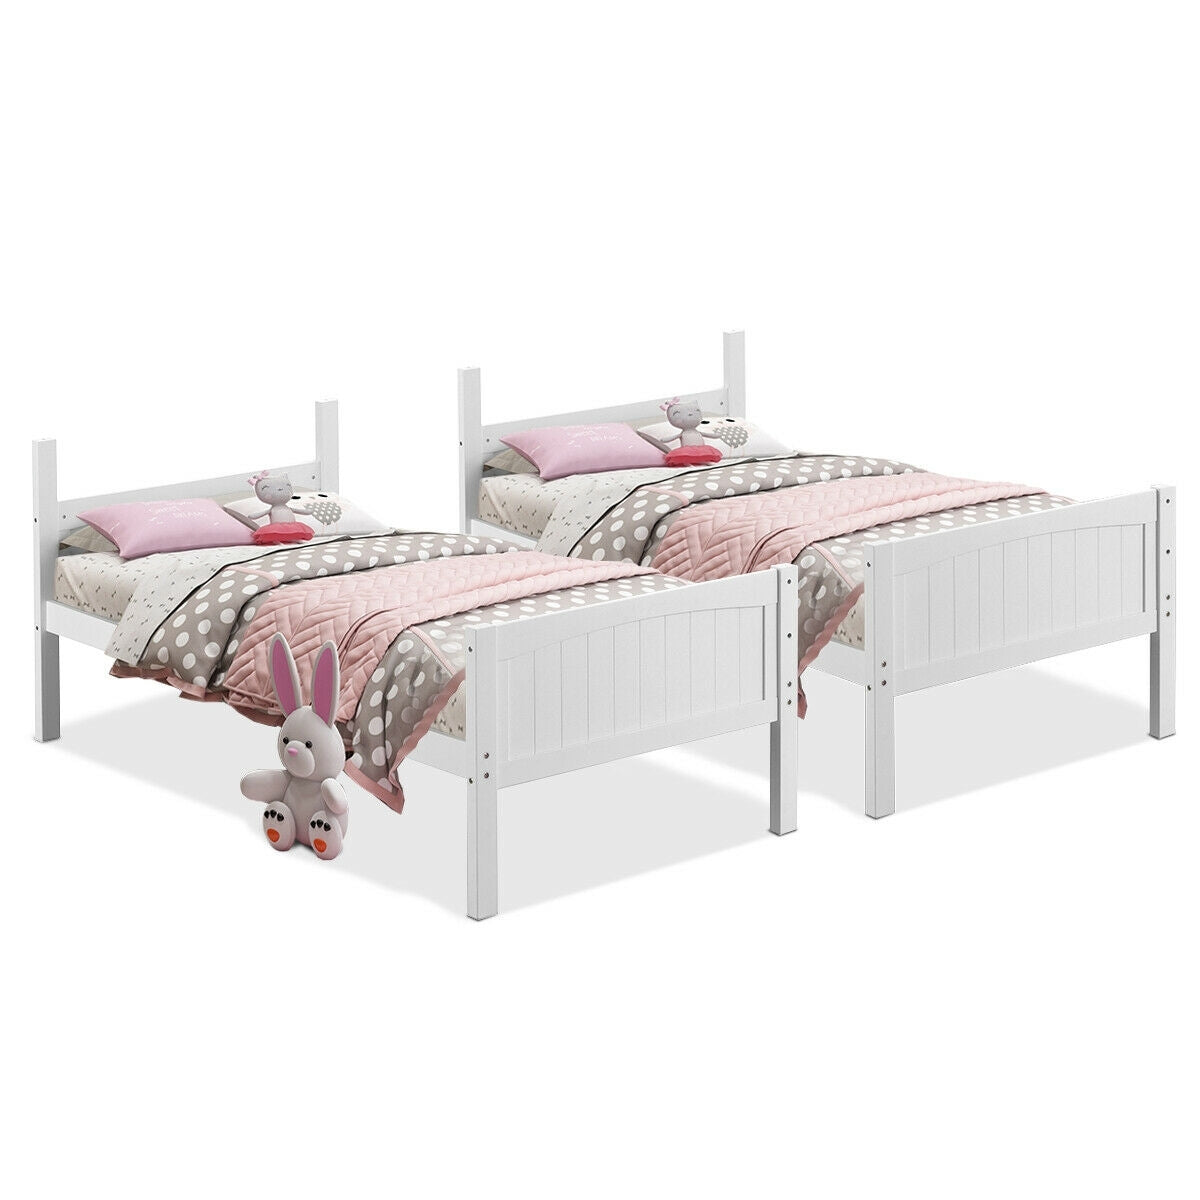 Twin Size Wooden Bunk Beds Convertible 2 Individual Beds-White